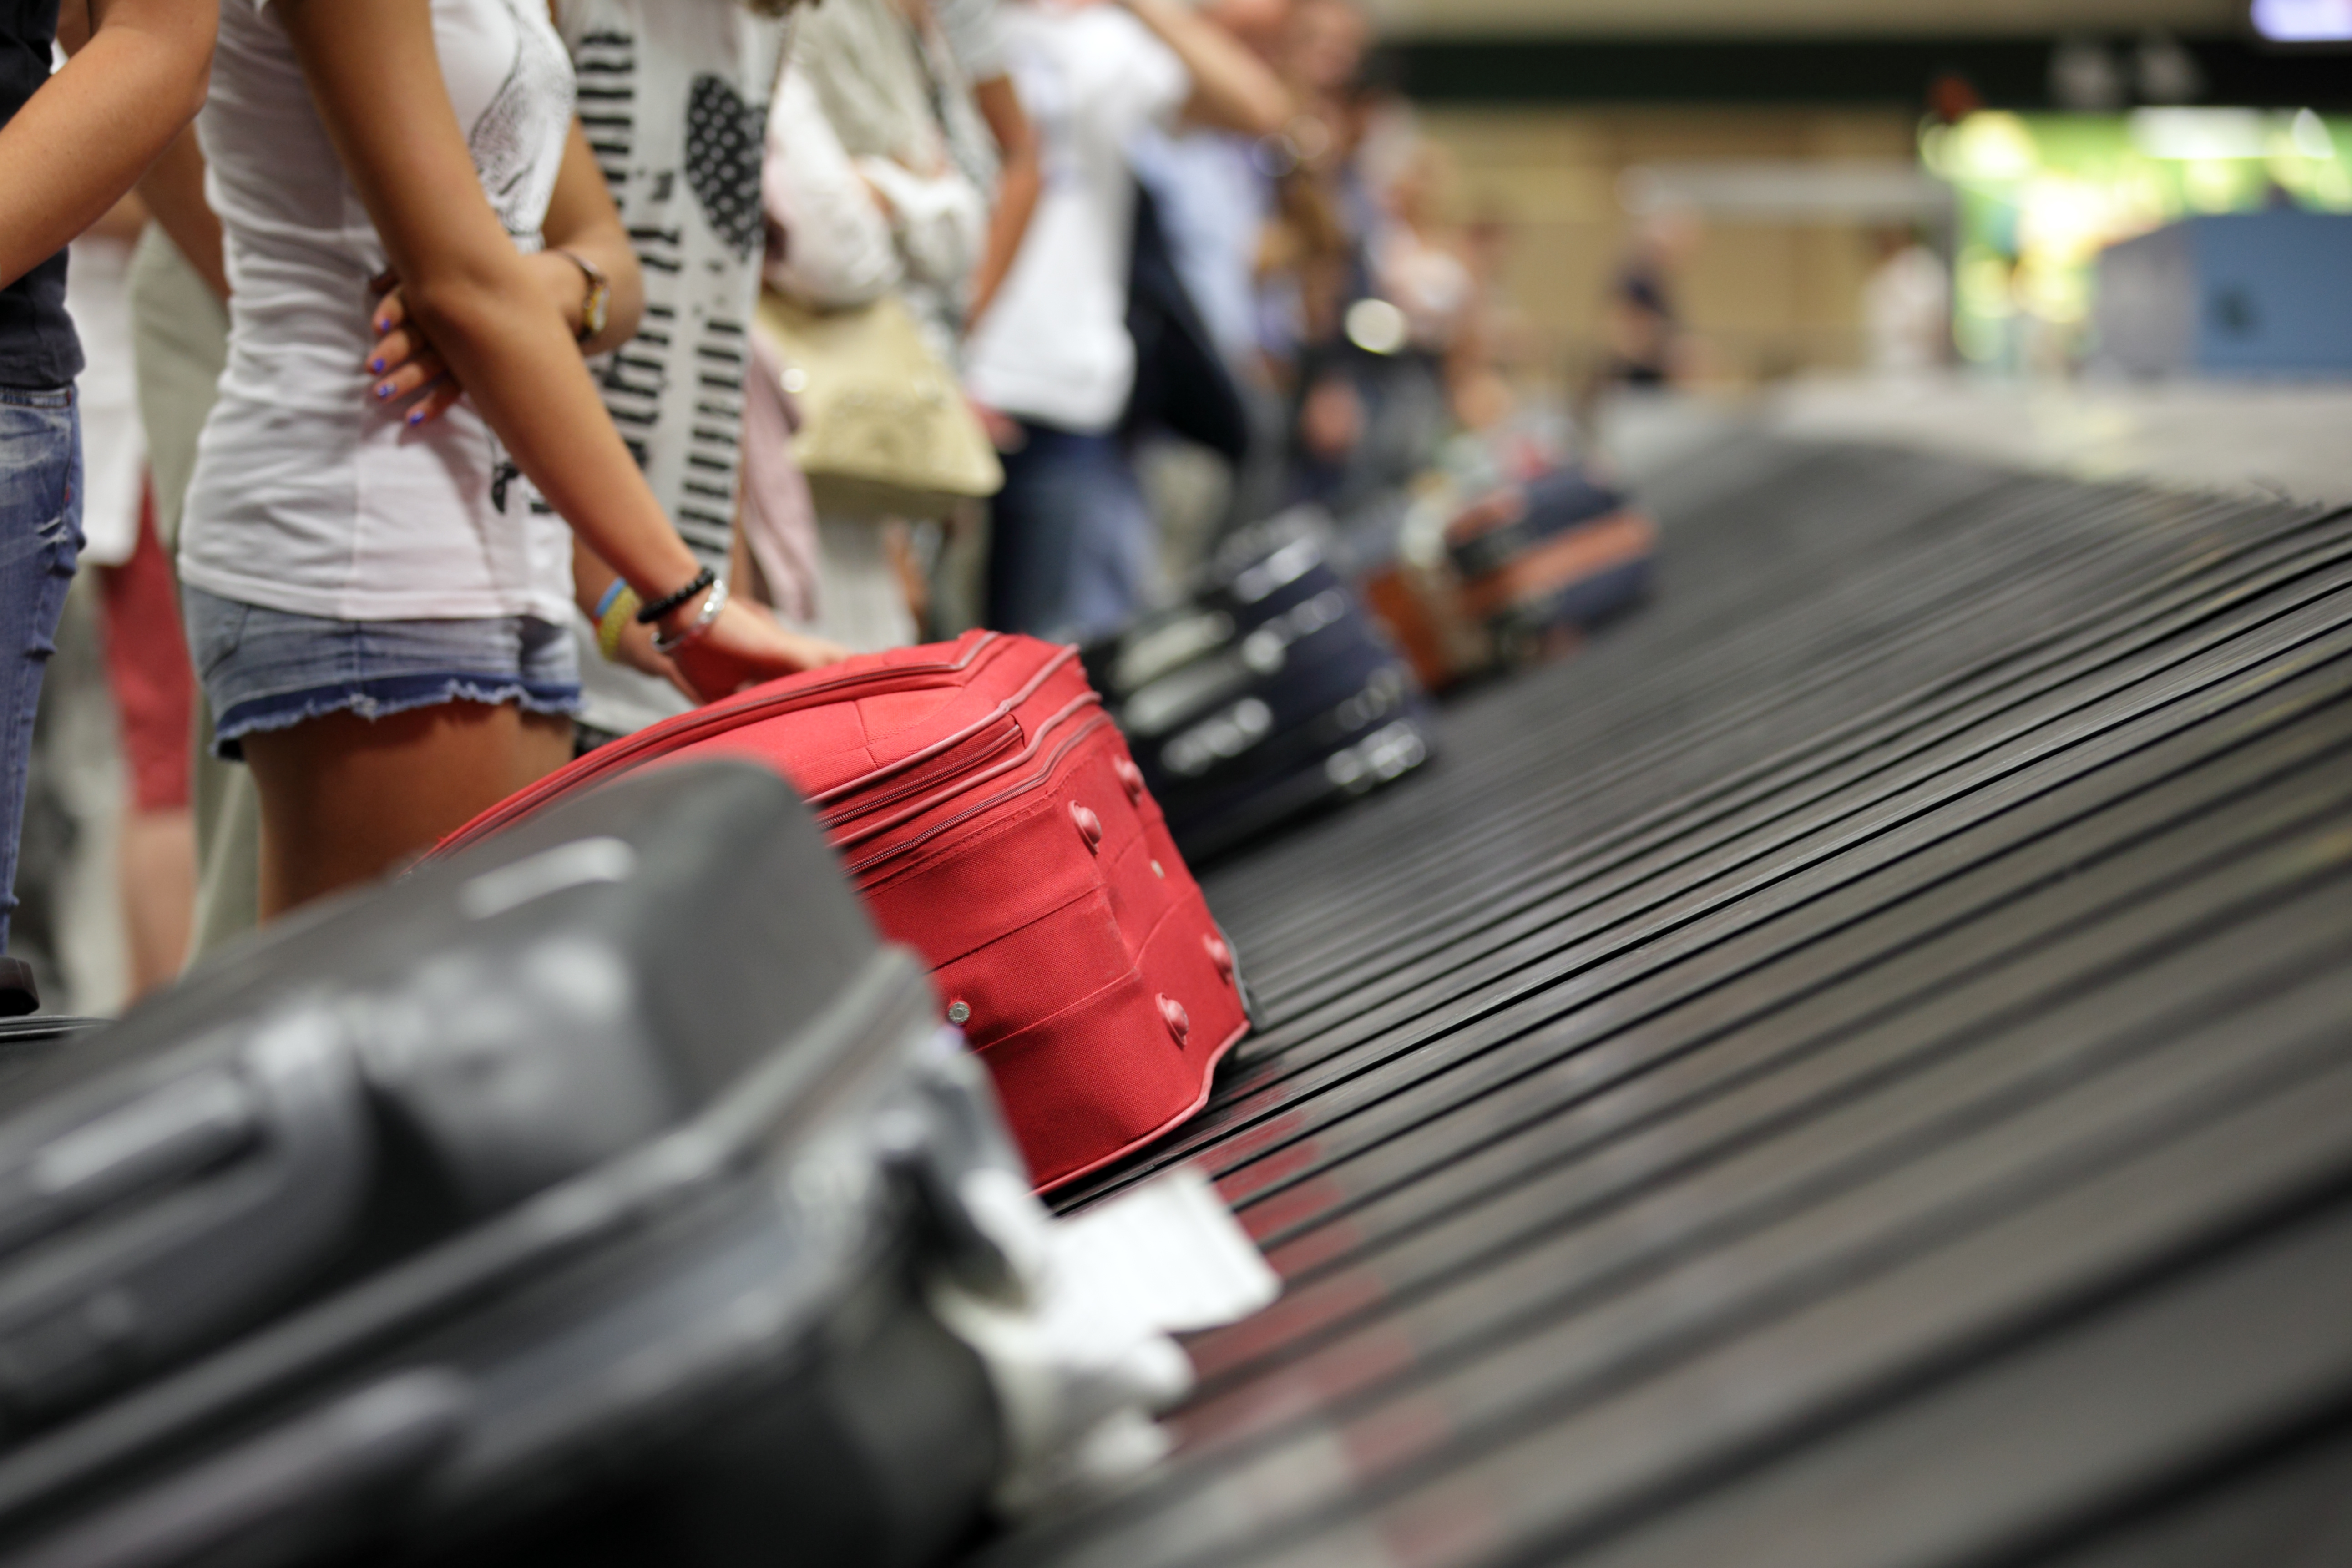 FAA Issues Scary Warning About Checked Bags With Lithium-ion Batteries